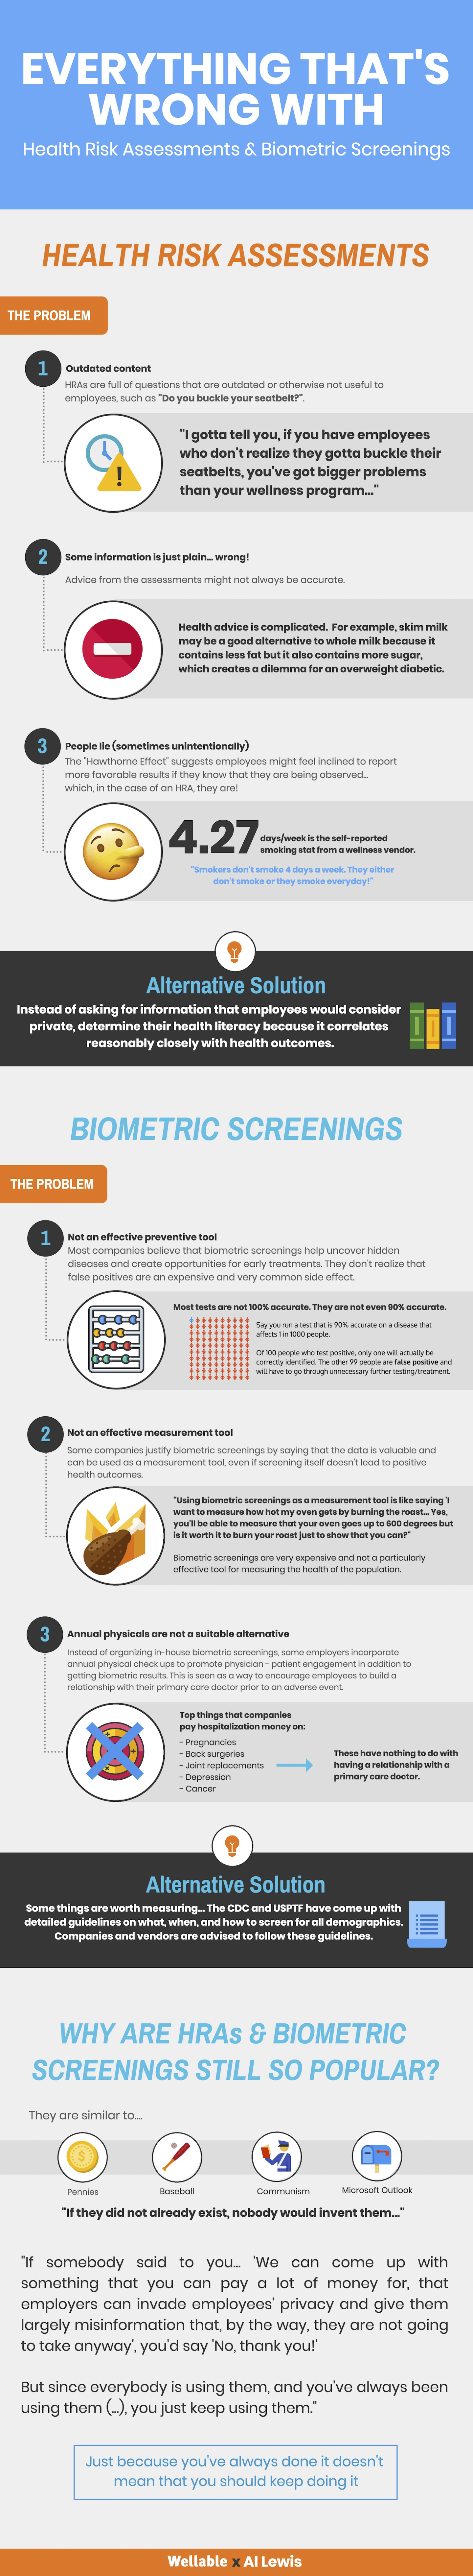 An overview of everything that's wrong with health risk assessments & biometric screenings